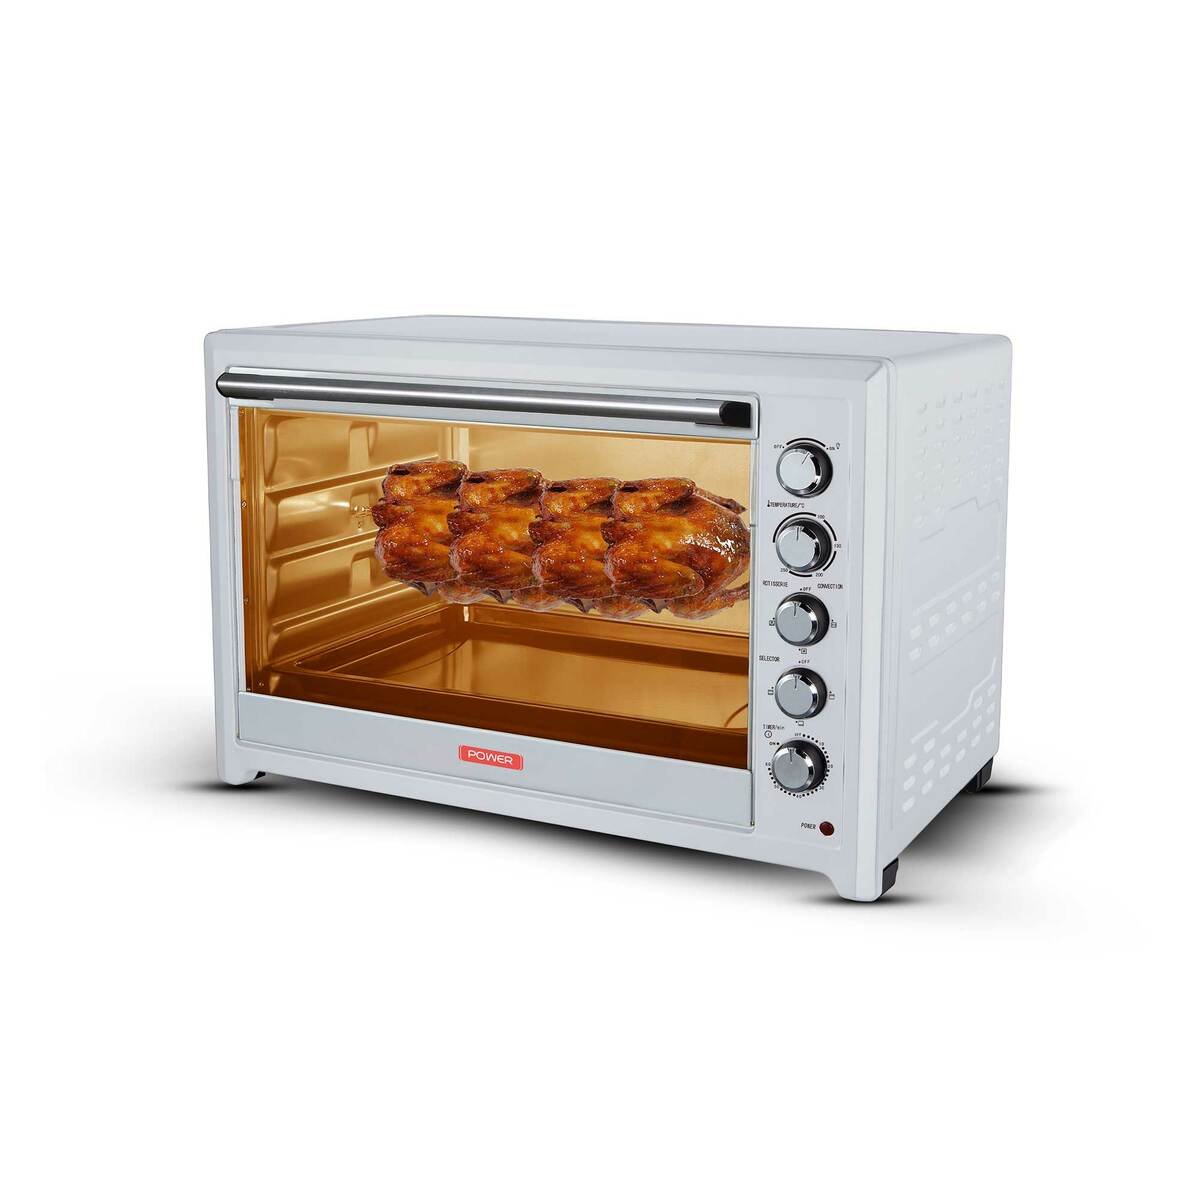 Oven Price in Oman: Unbeatable Deals and Discounts